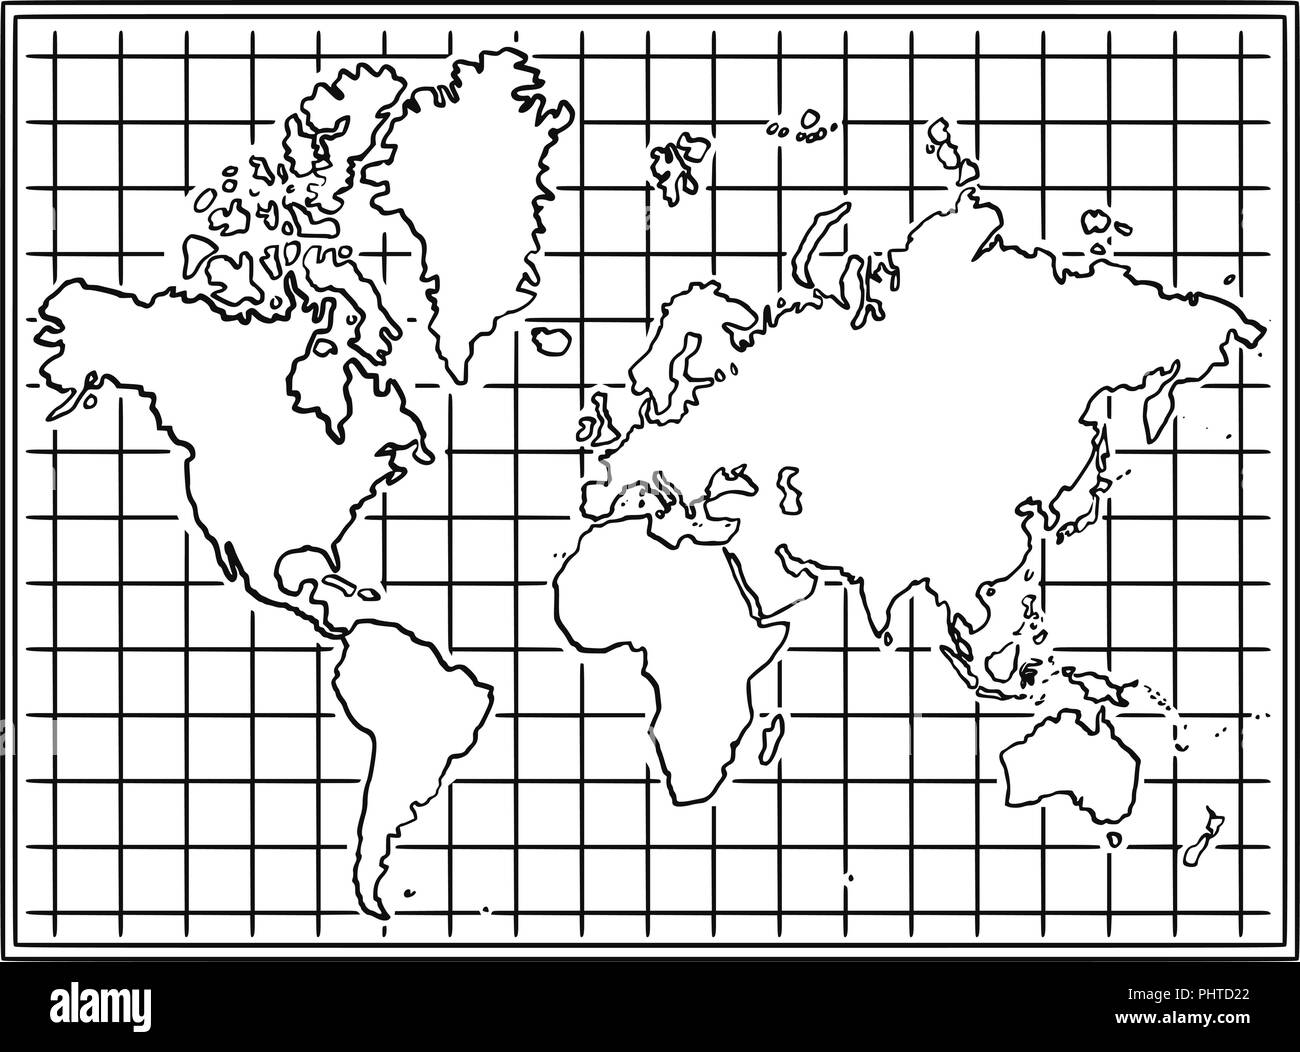 Cartoon Drawing Illustration of World Map in Black and White Stock Vector  Image & Art - Alamy